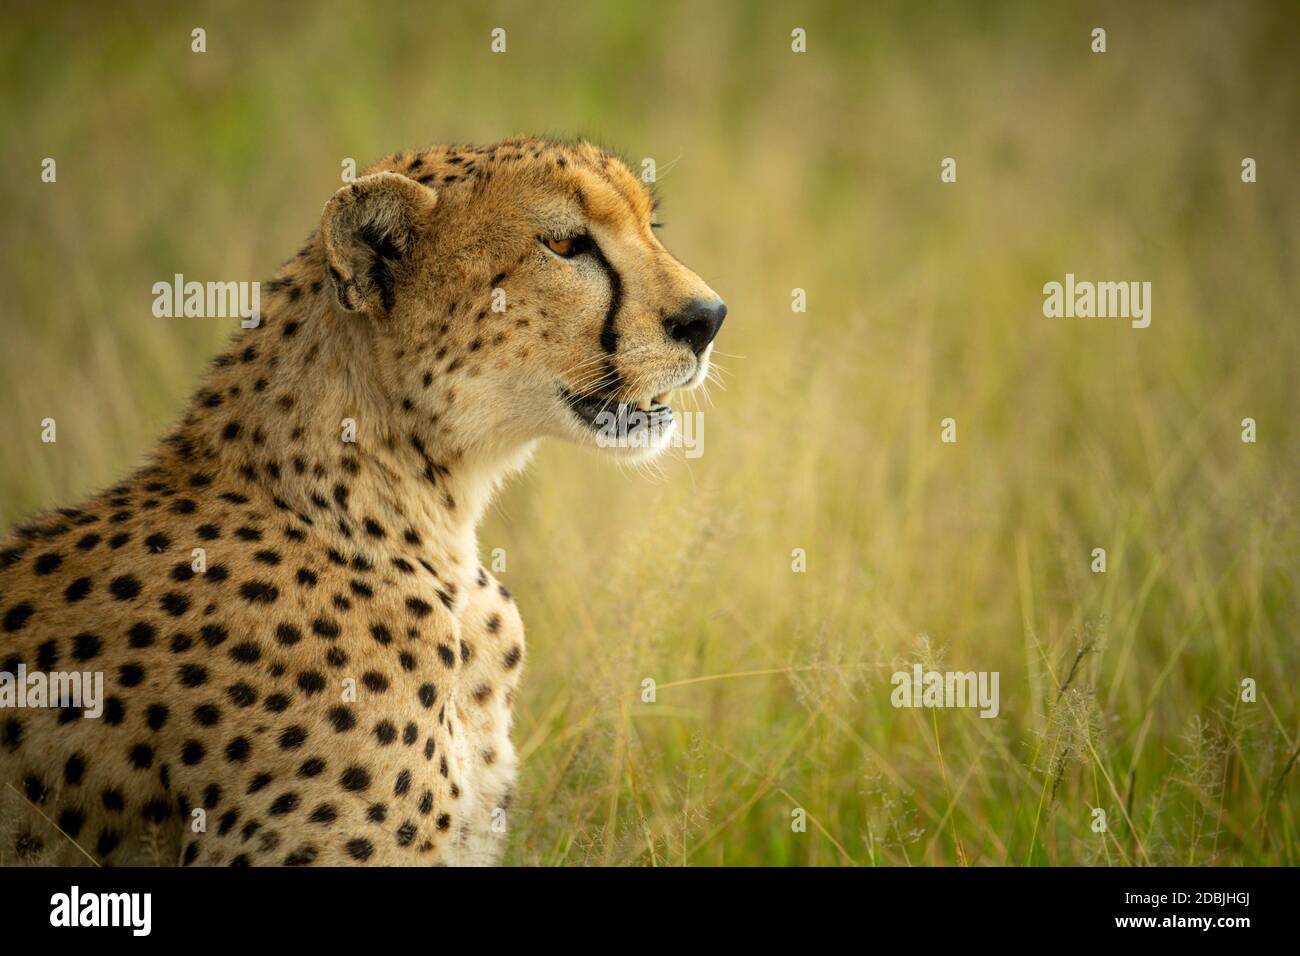 Close-up of cheetah sitting in grass staring Stock Photo